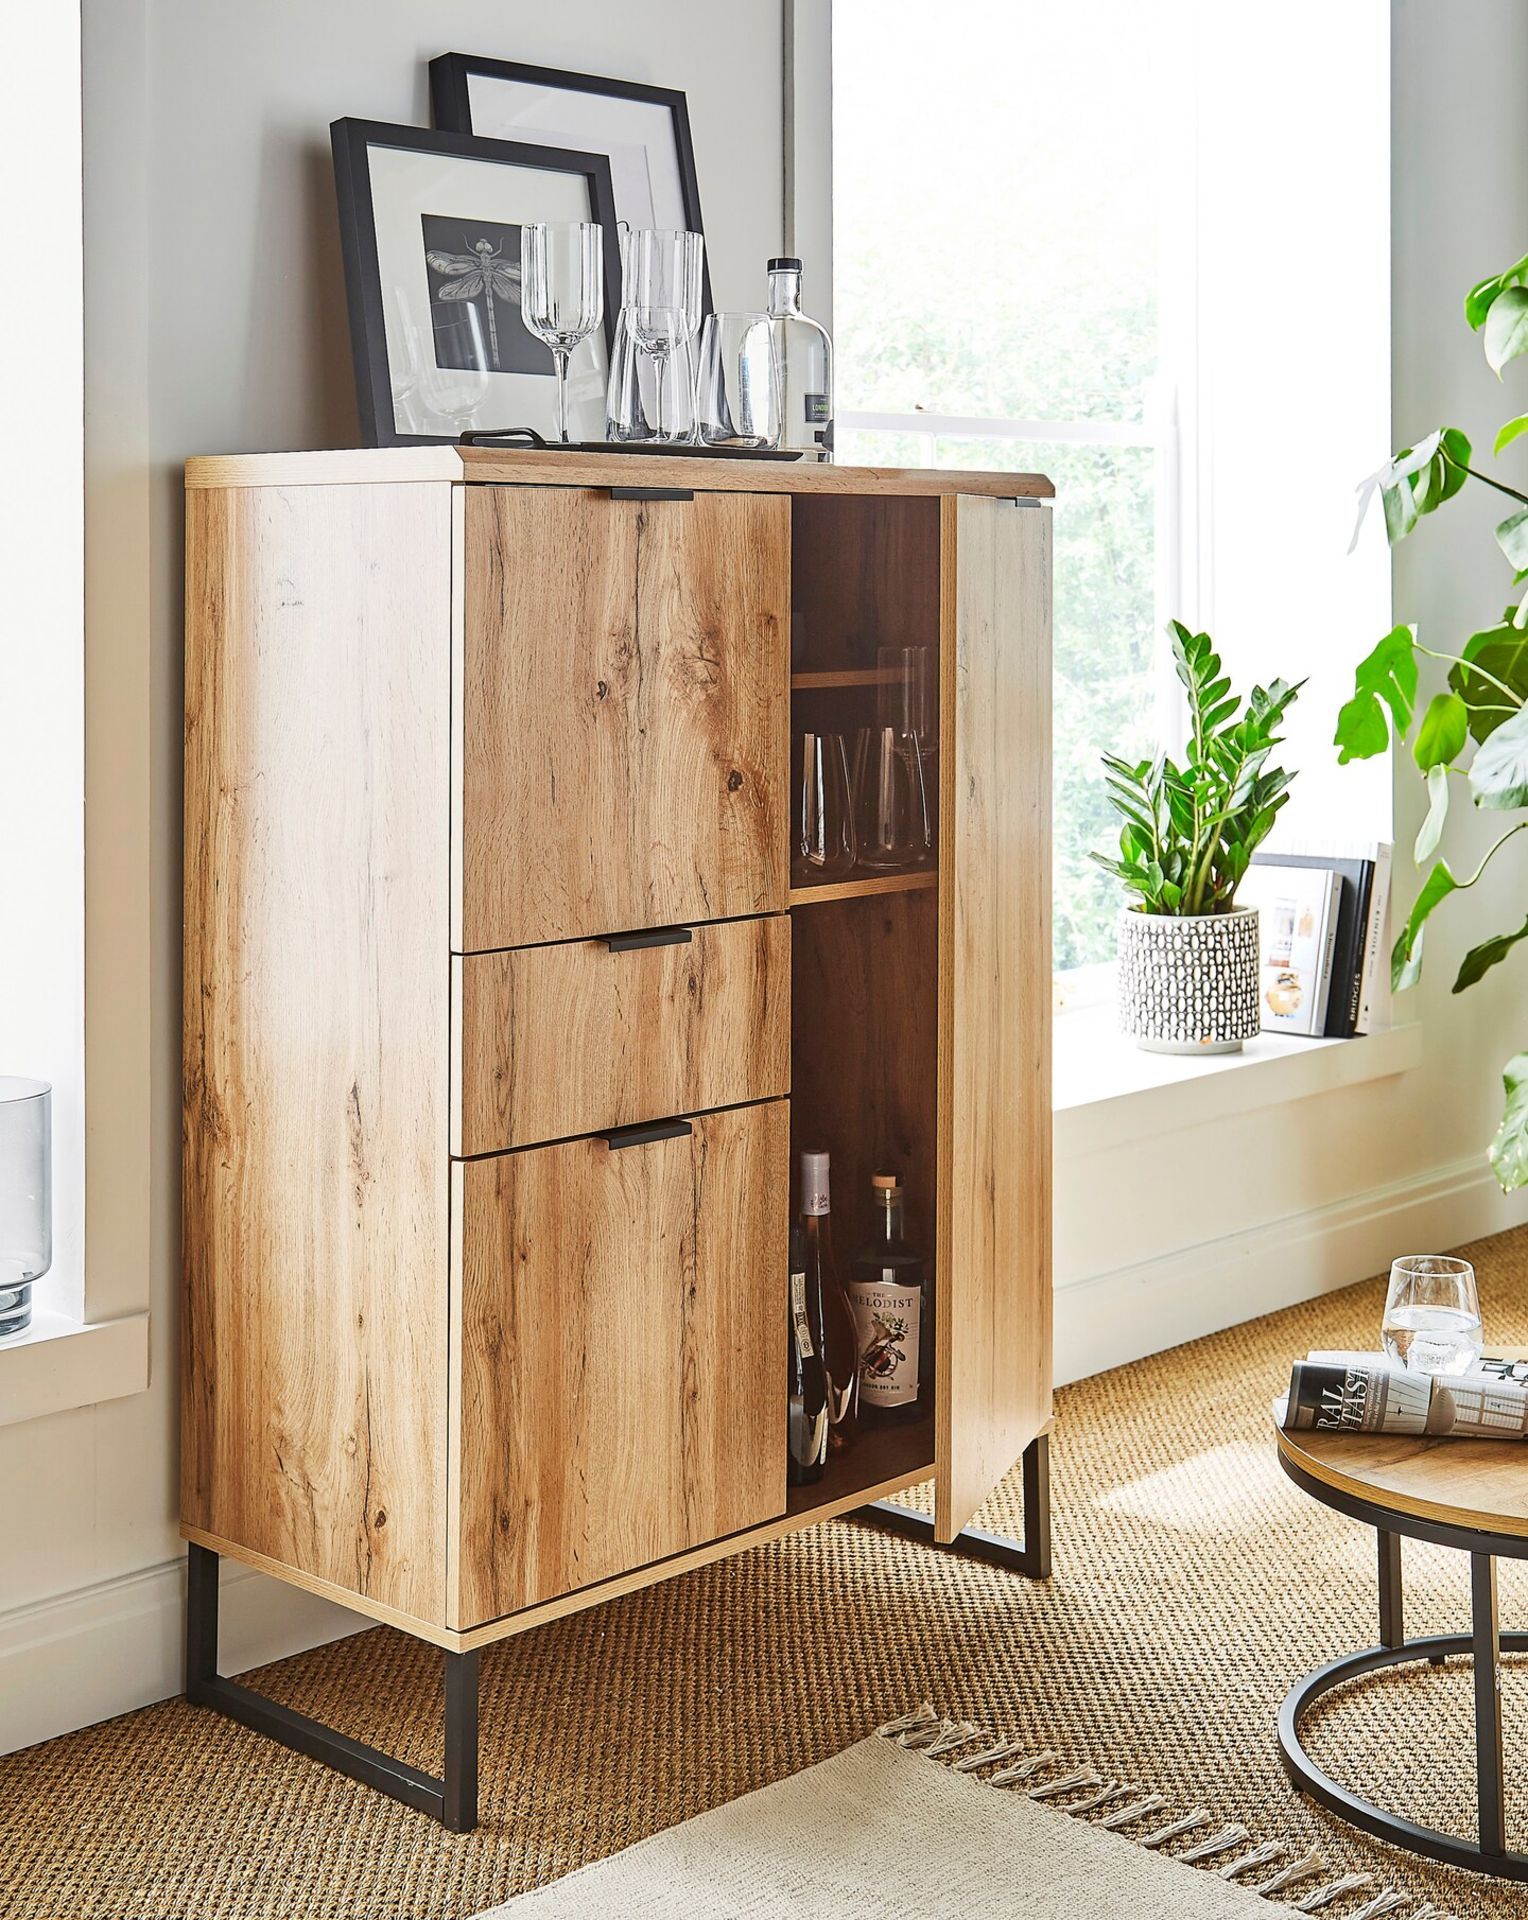 BRAND NEW SHOREDITCH Drinks Cabinet. OAK. RRP £299. The Shoreditch Range is a contemporary and